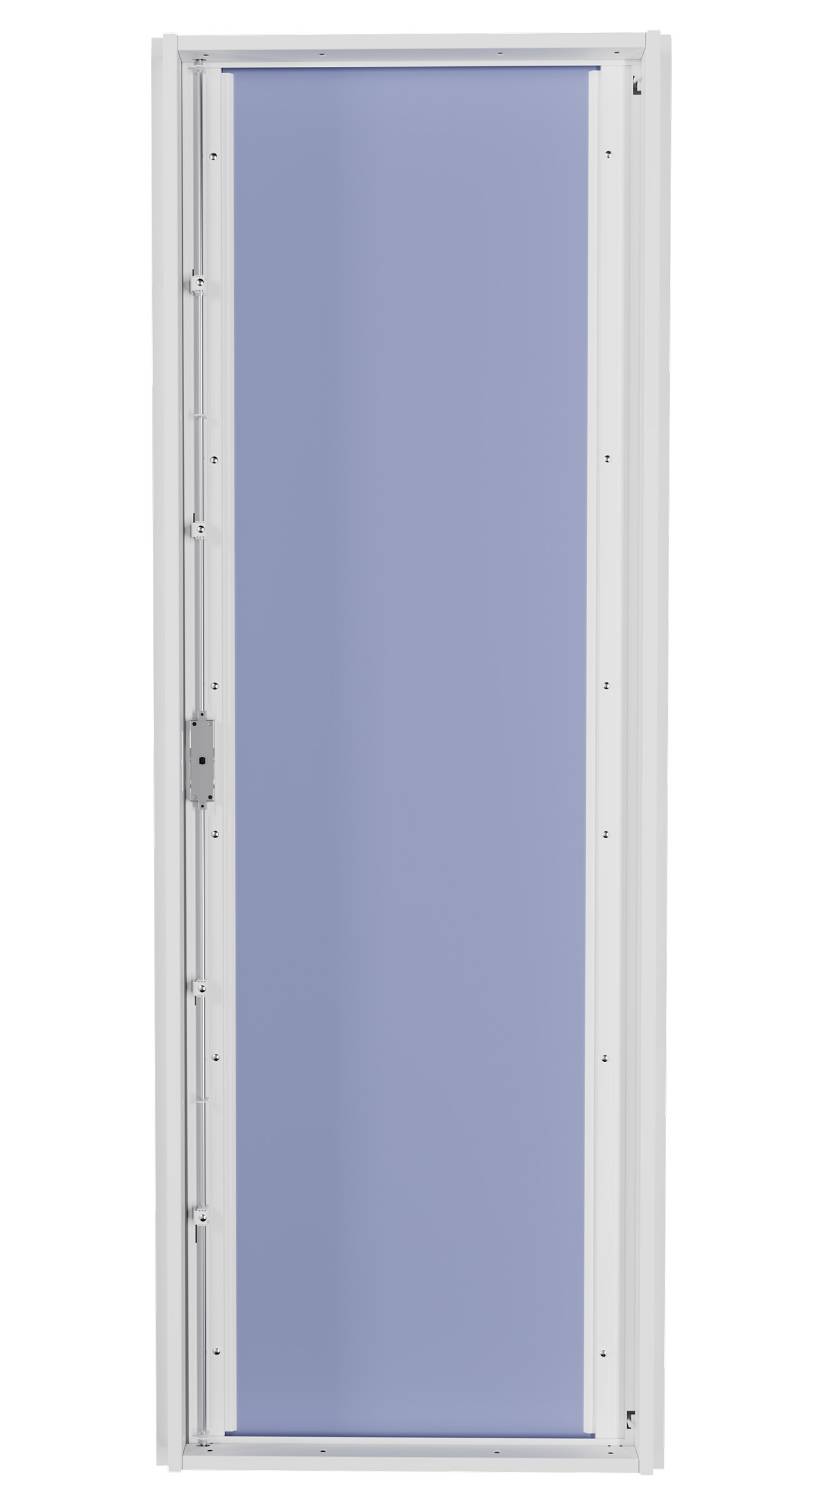 Metal Riser Door (Range 57) - Picture Frame - 90 Minutes Fire Rated - Smoke & Airtight Tested - 33dB Acoustic - Riser Door